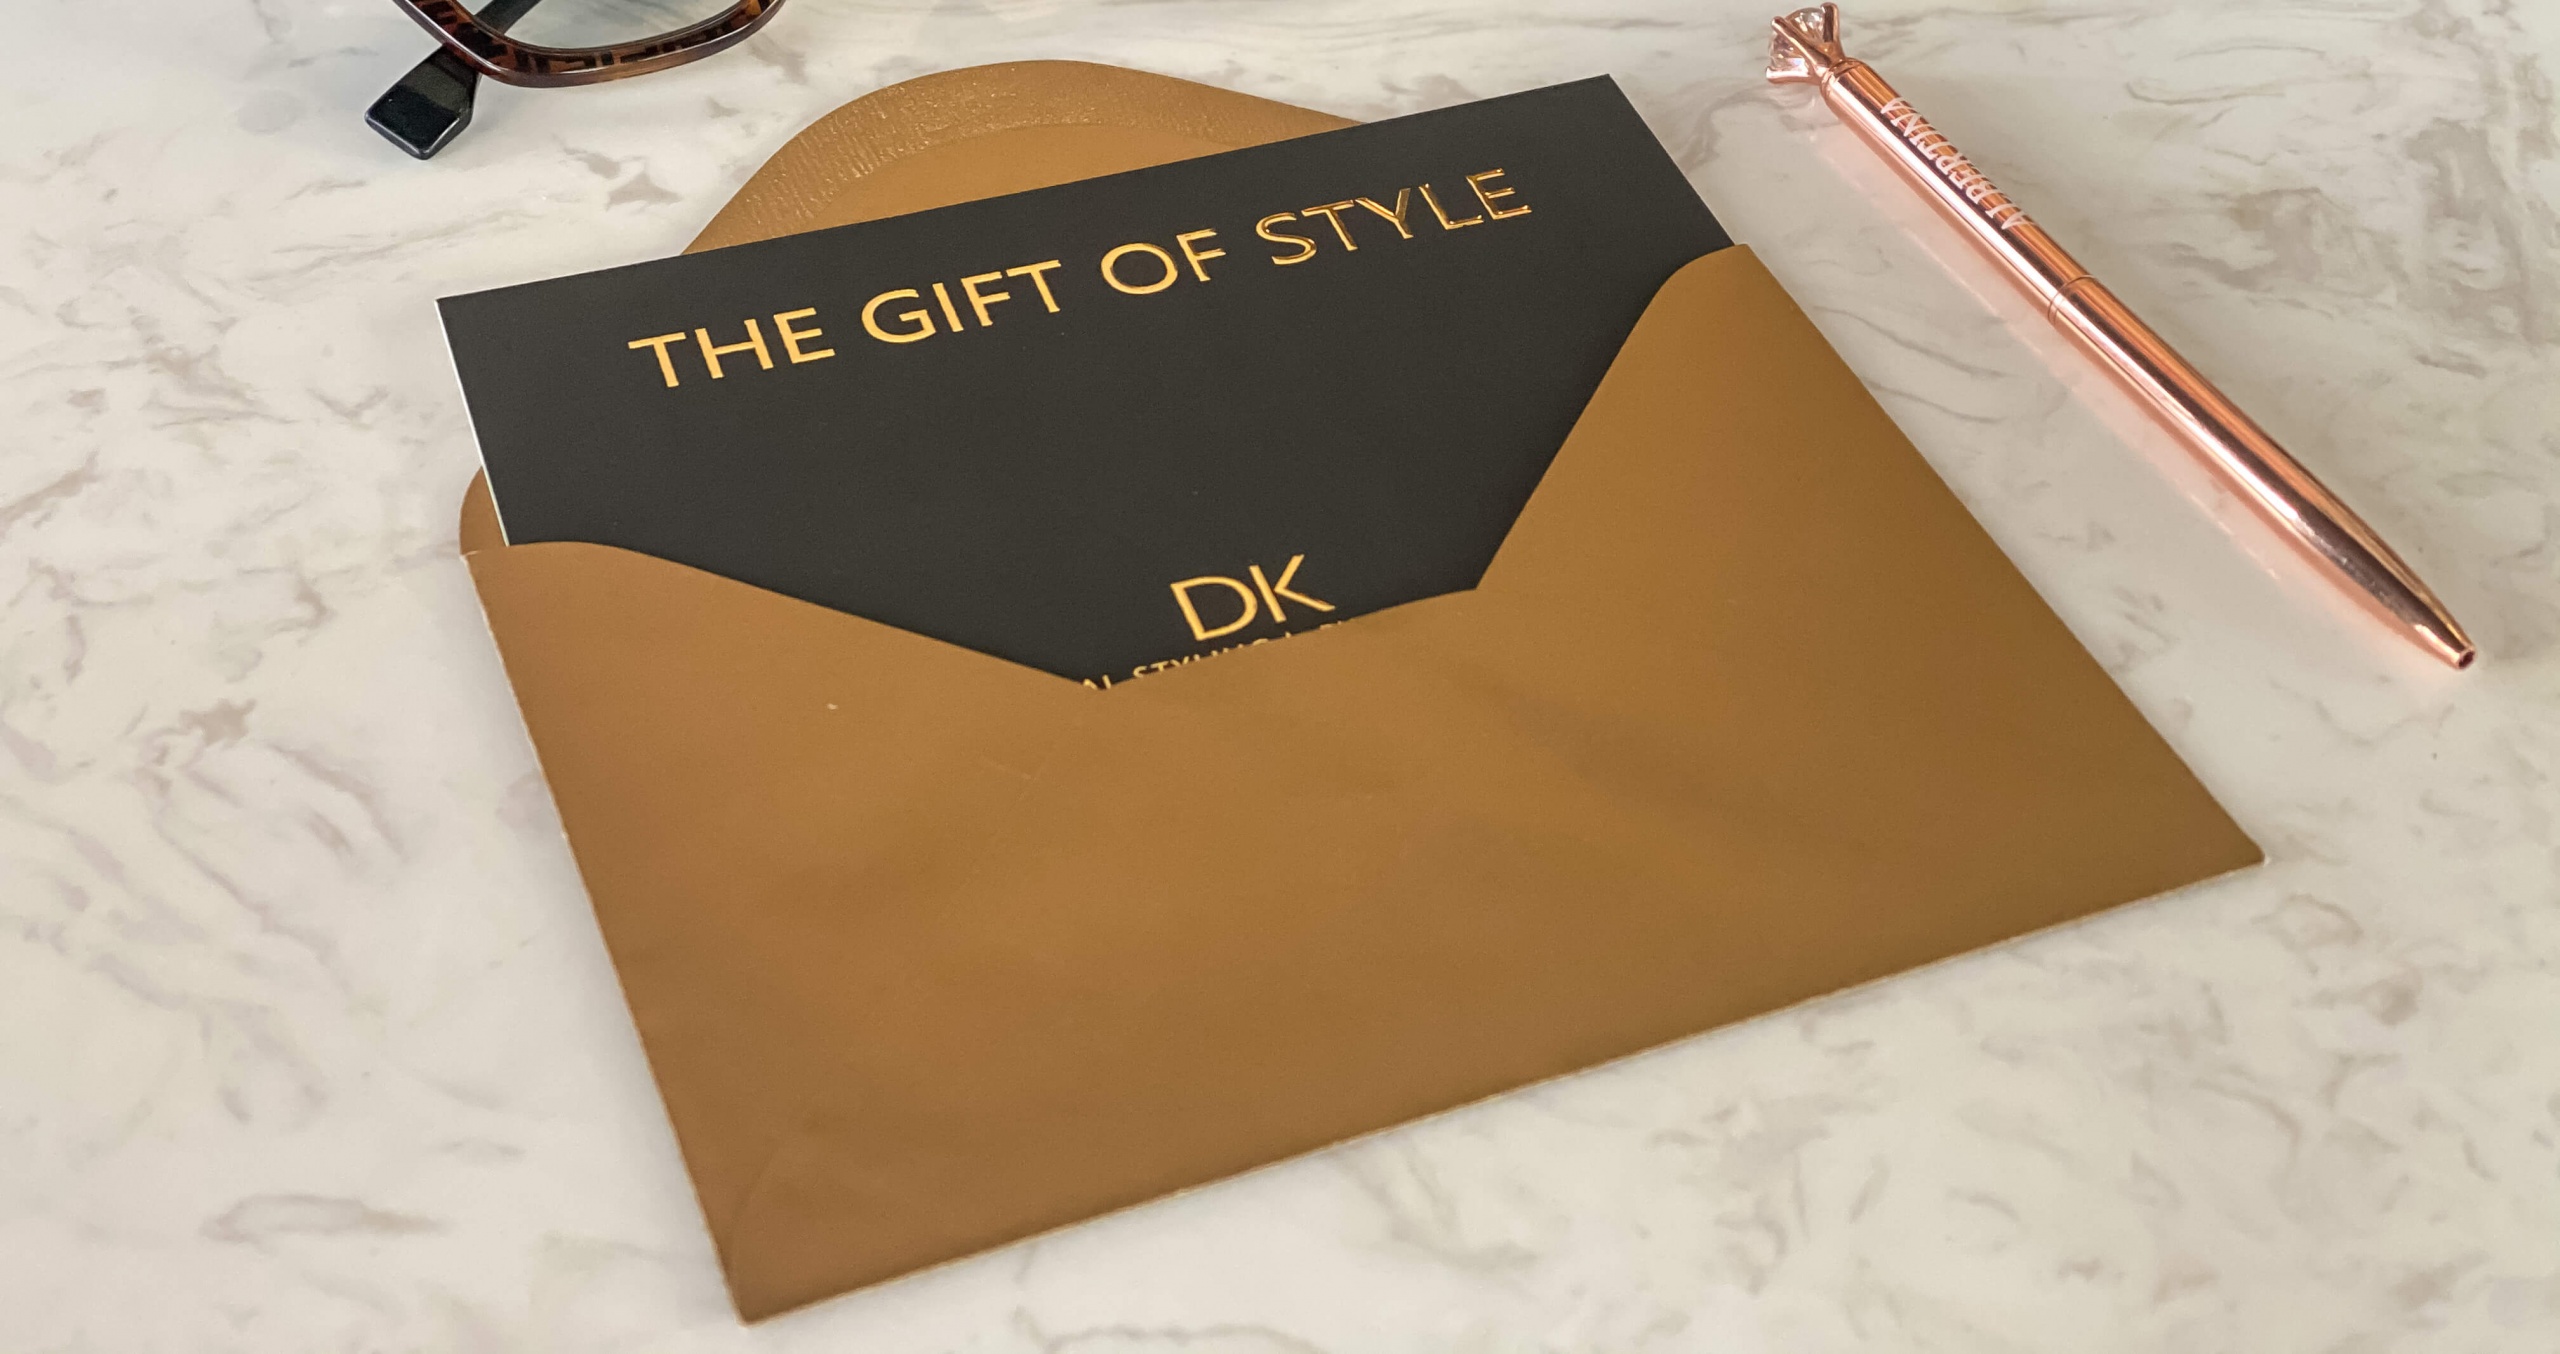 Personal Styling Experience Gift Card by Deni Kiro - Stylist from London